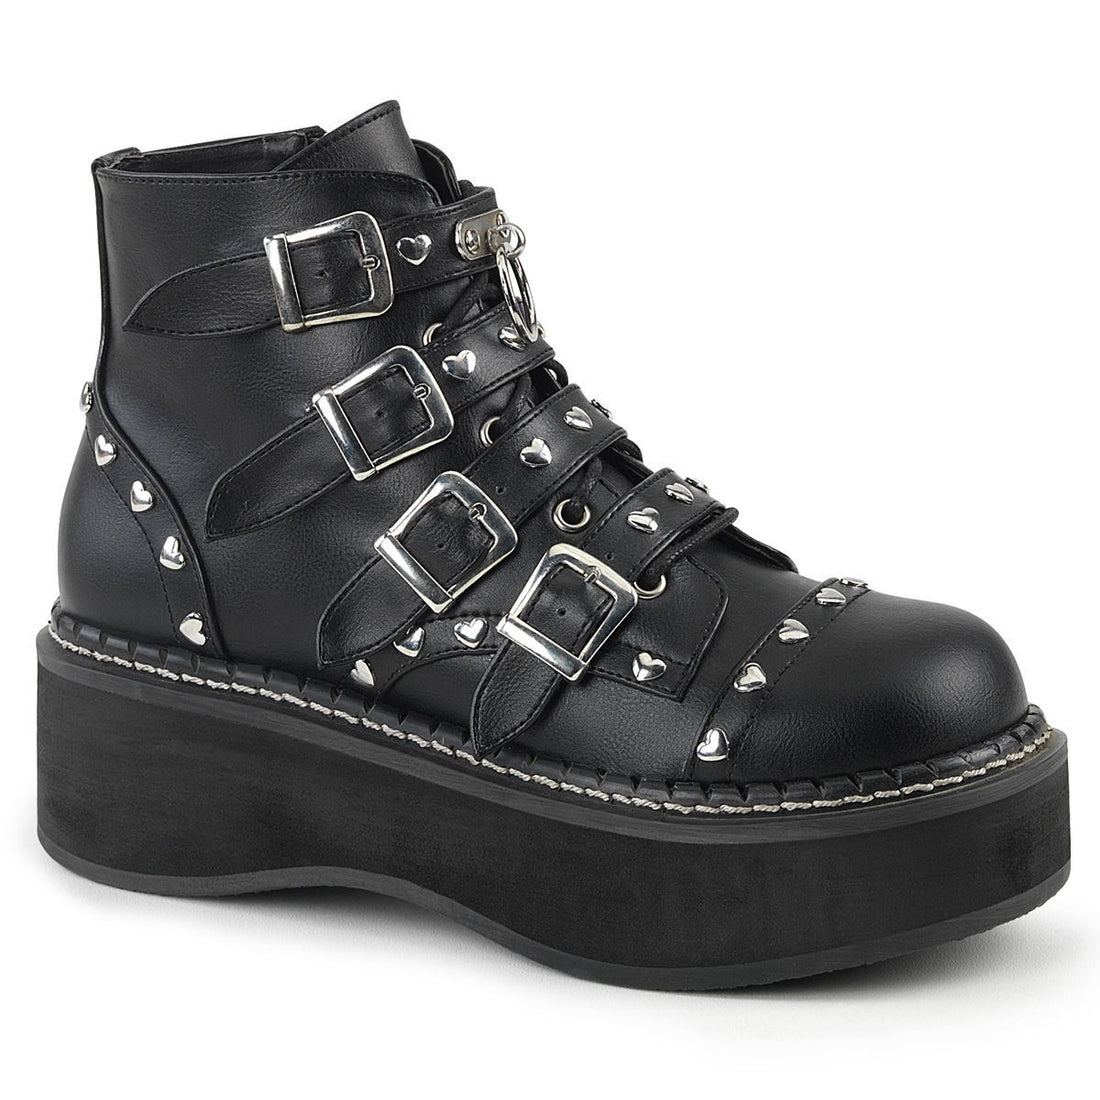 Demonia Emily 315 Black Studded Ankle Boots - Upperclass Fashions 